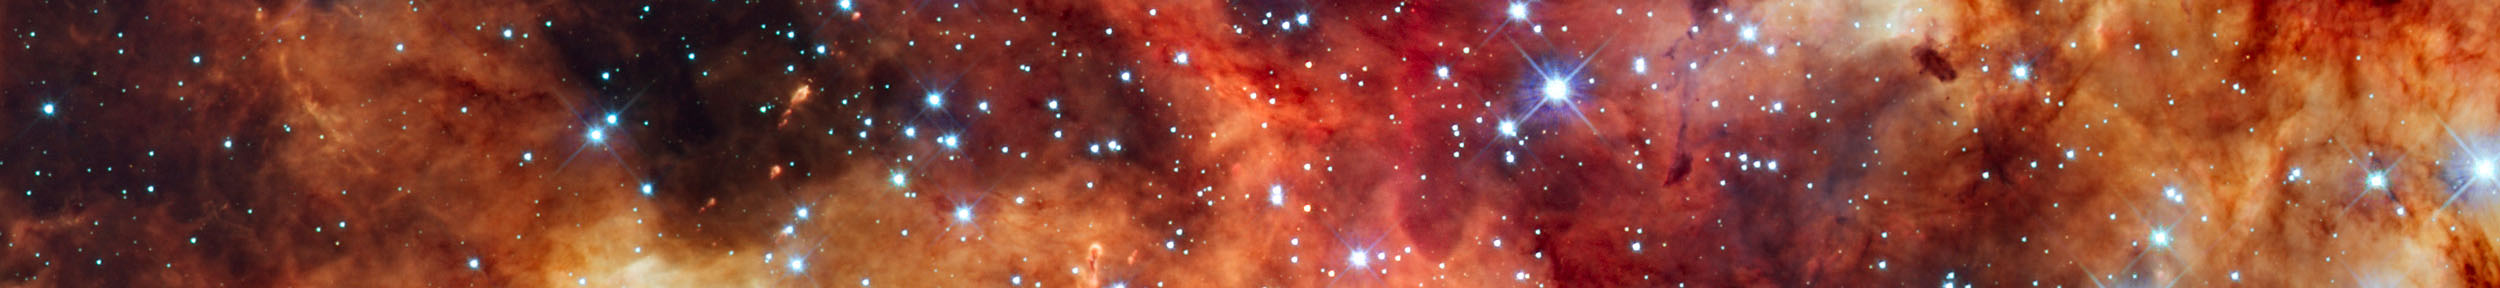 astronomy cluster of stars